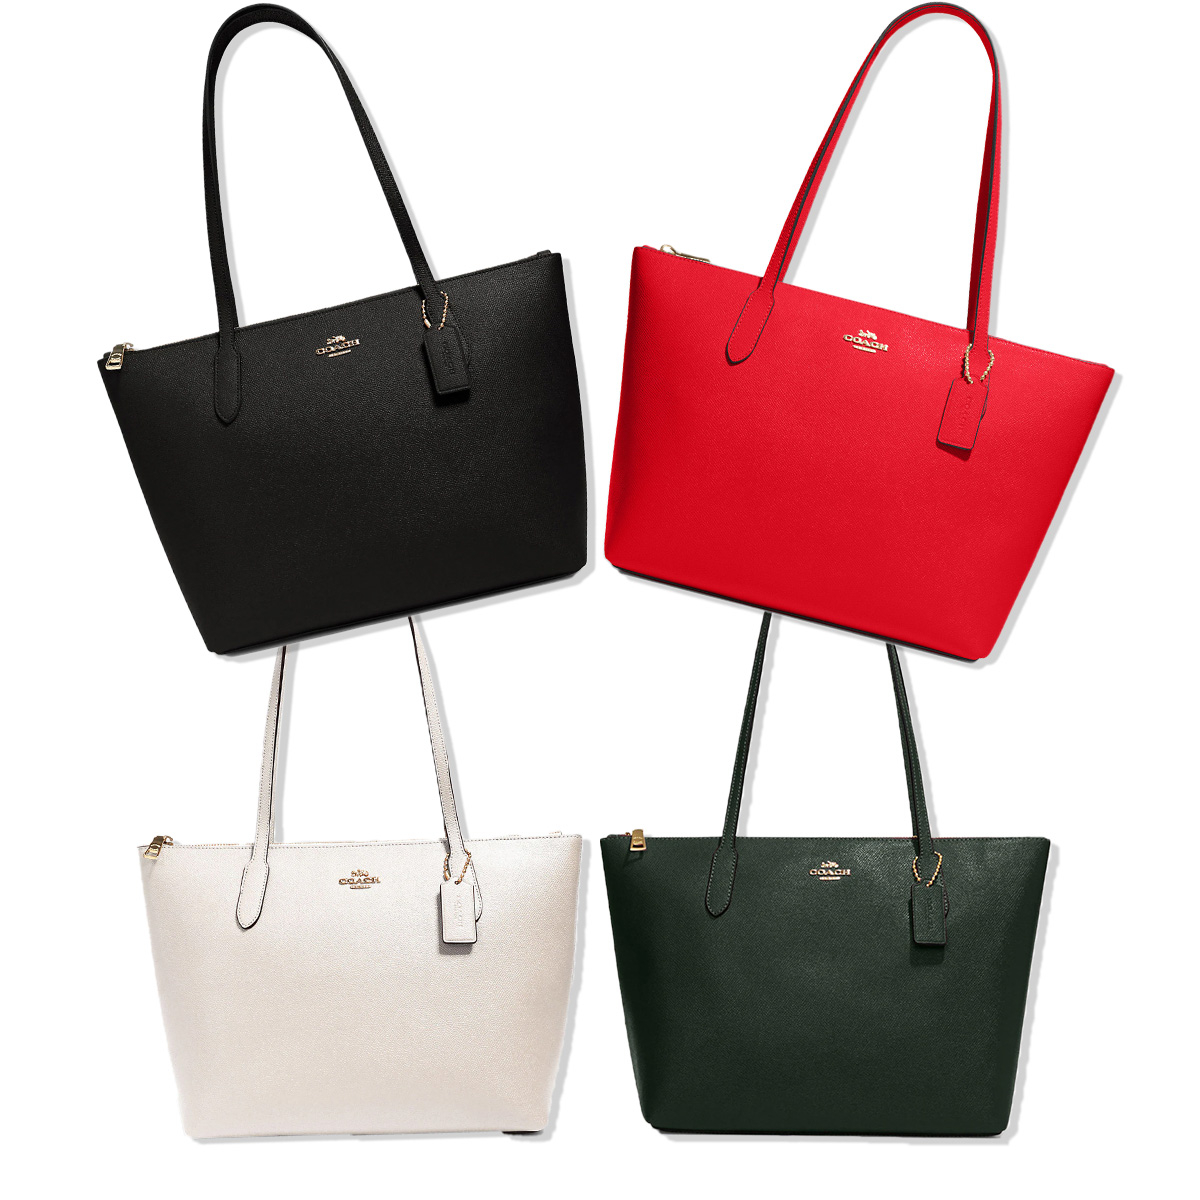 Kate Spade 24-Hour Flash Deal: Get This $360 Tote Bag for Just $79